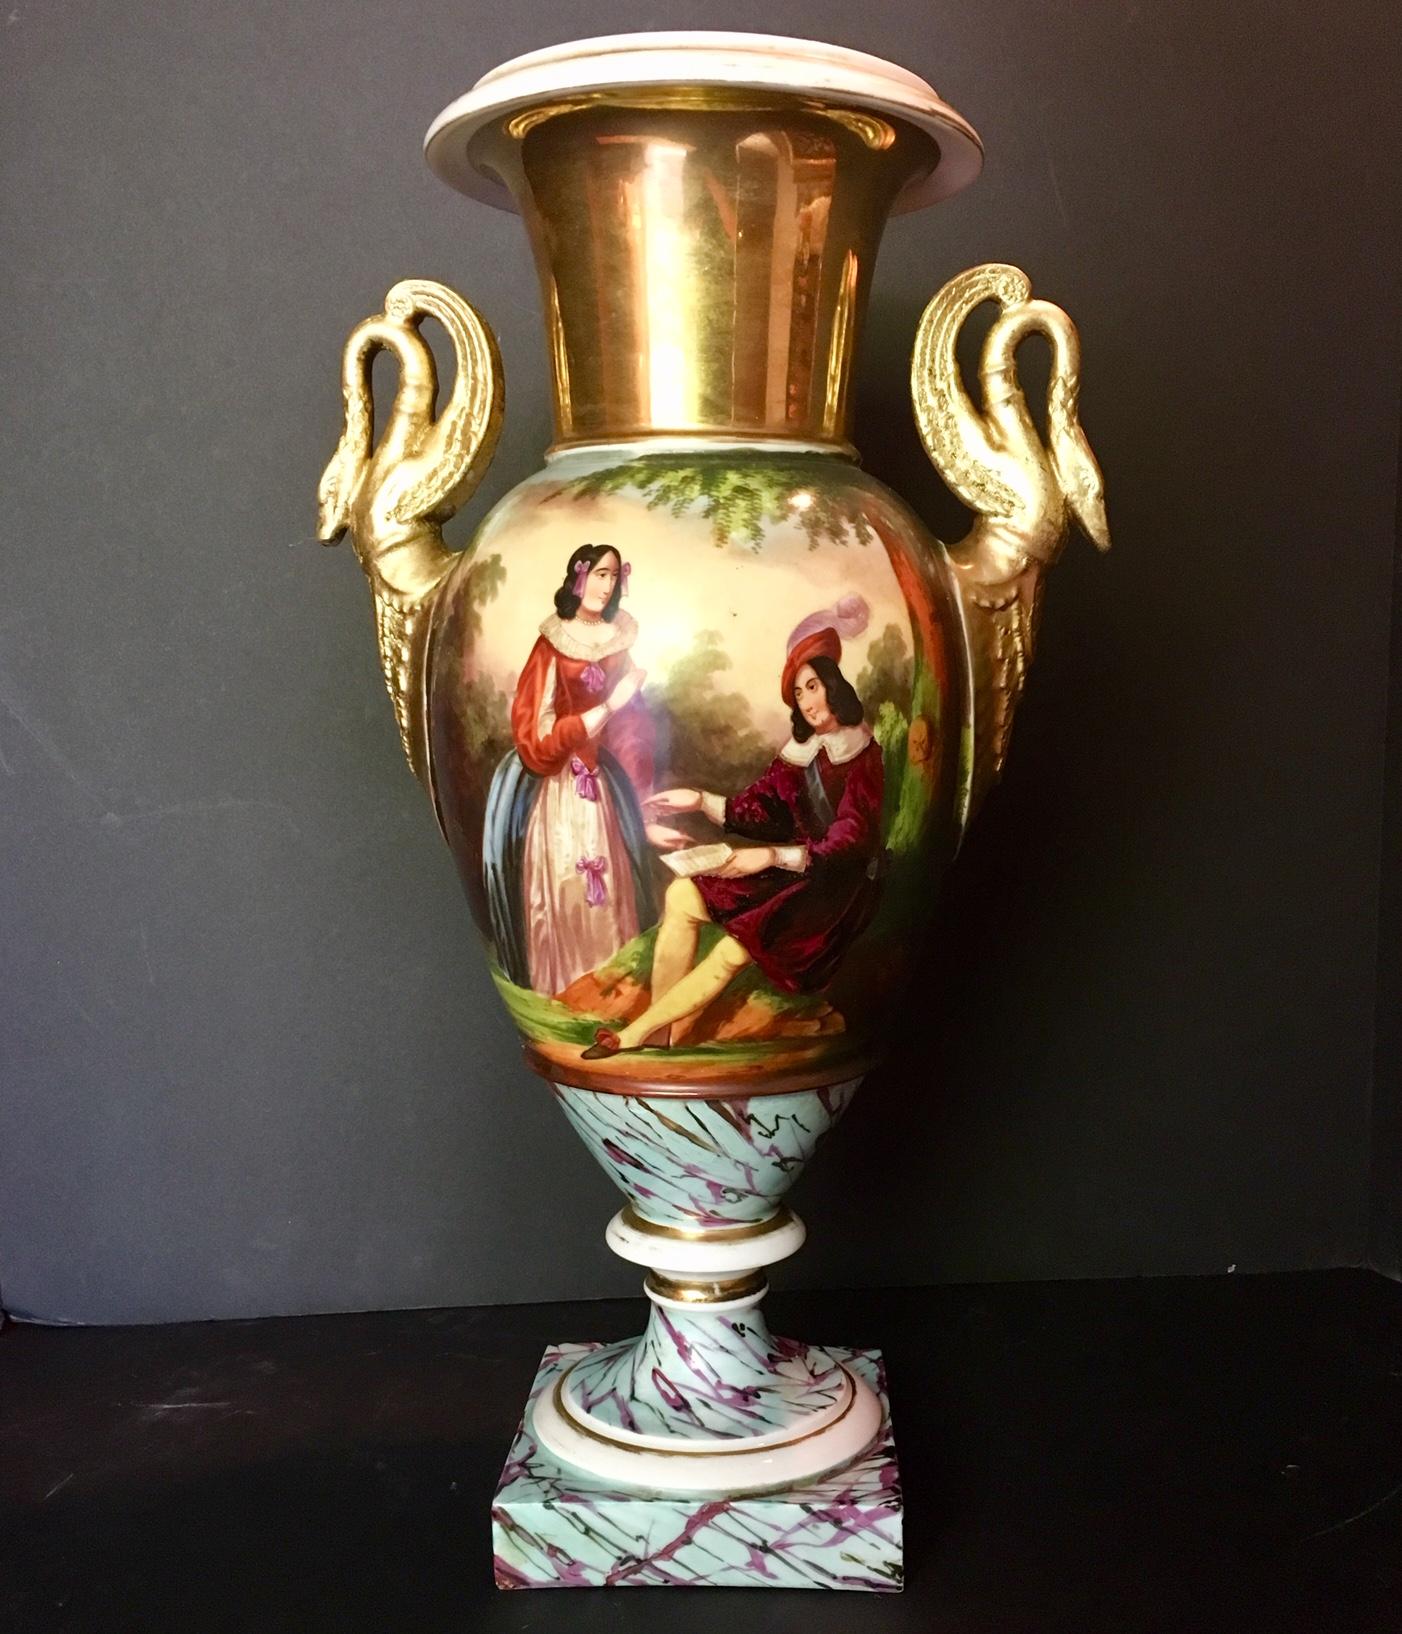 This beautiful early Old Paris vase dates from the early 19th century. In the front It features a finely hand painted romantic couple. The back pictures a lovely landscape. The vase is flanked by a pair of elegant swan handles. Some illegible relief